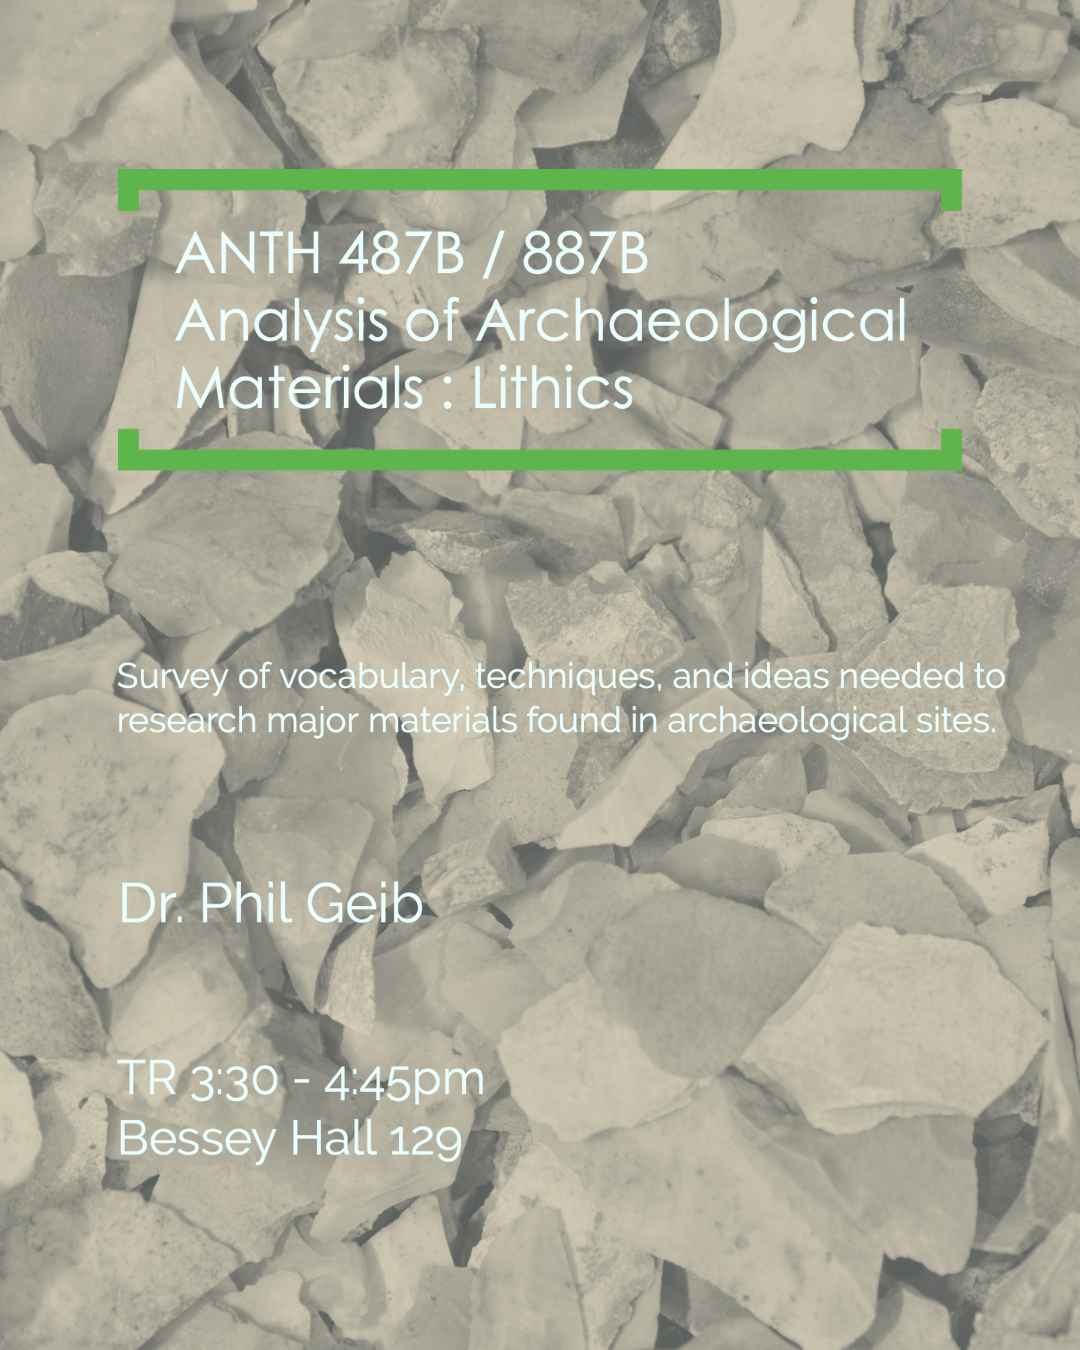 ANTH 487B/887B: Analysis of Archaeological Materials: Lithics